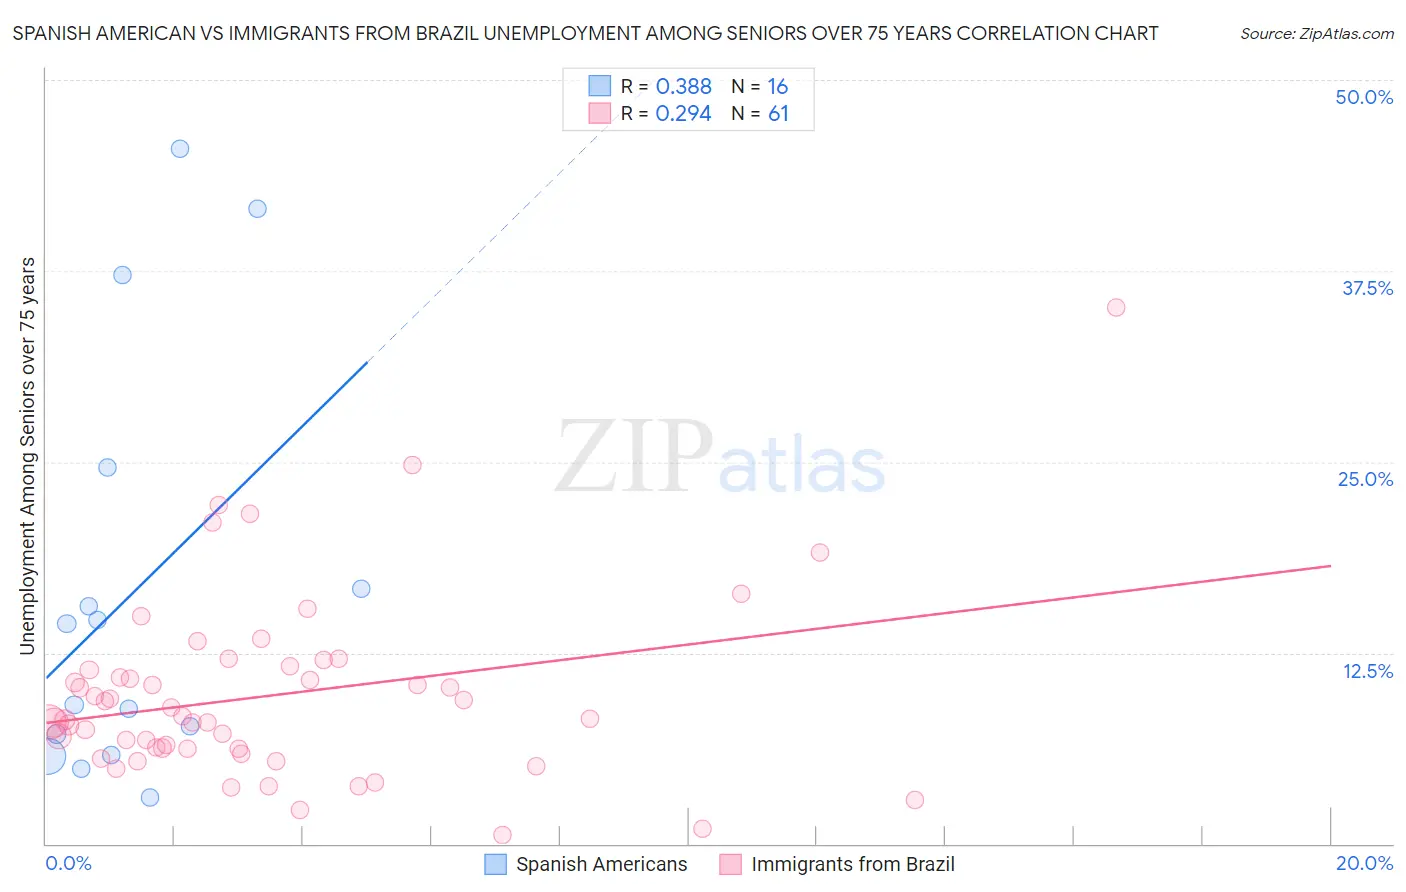 Spanish American vs Immigrants from Brazil Unemployment Among Seniors over 75 years